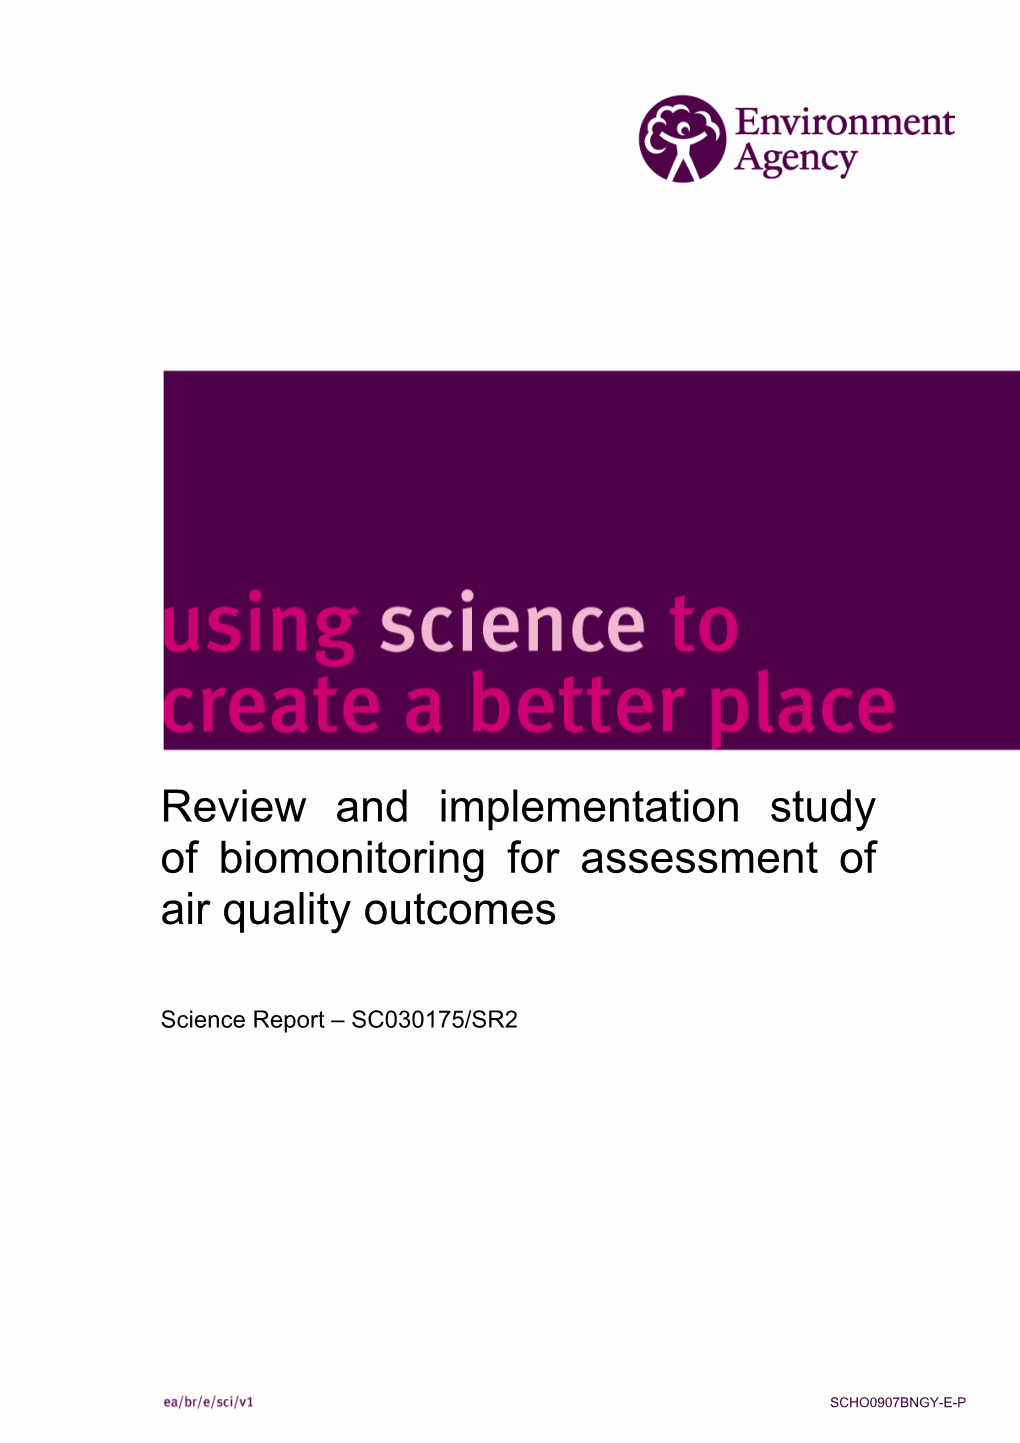 Review and Implementation Study of Biomonitoring for Assessment of Air Quality Outcomes